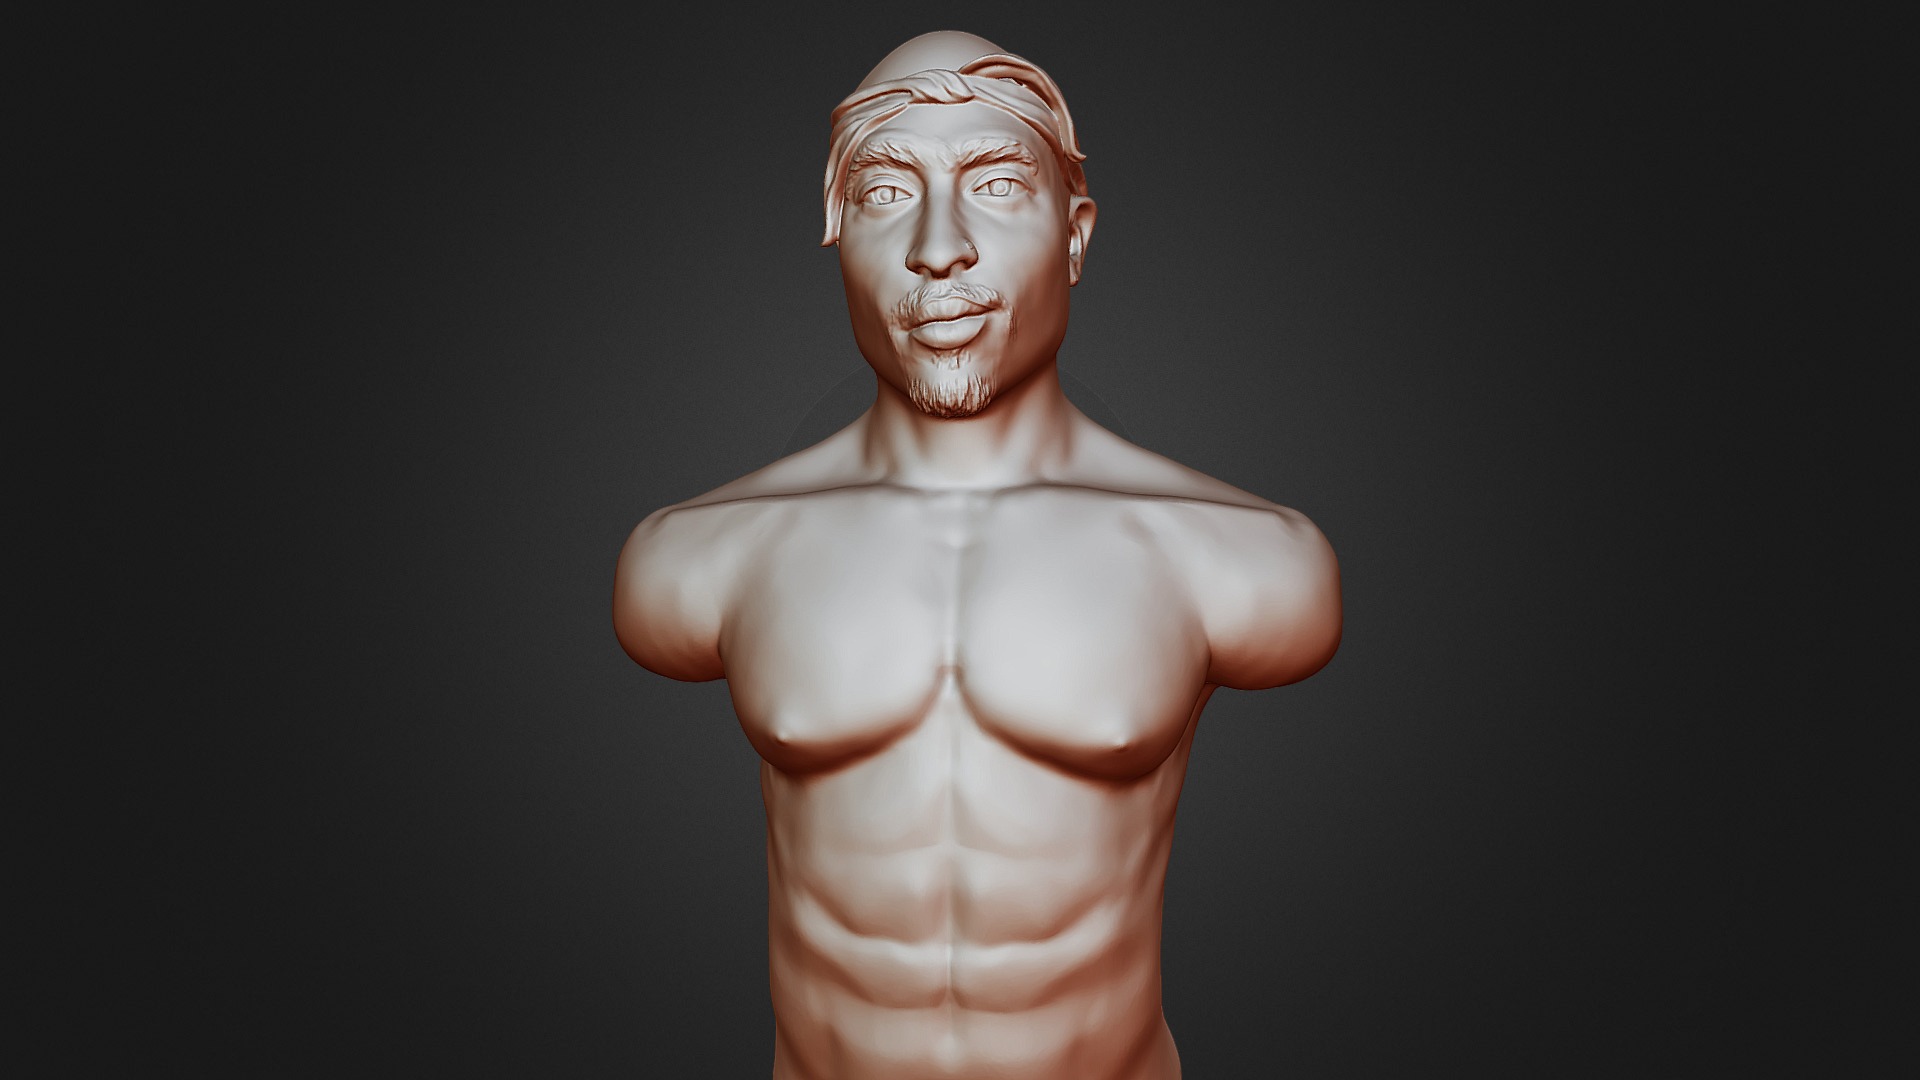 3D model 2 Pac 3D printable portrait bust - This is a 3D model of the 2 Pac 3D printable portrait bust. The 3D model is about a statue of a person.